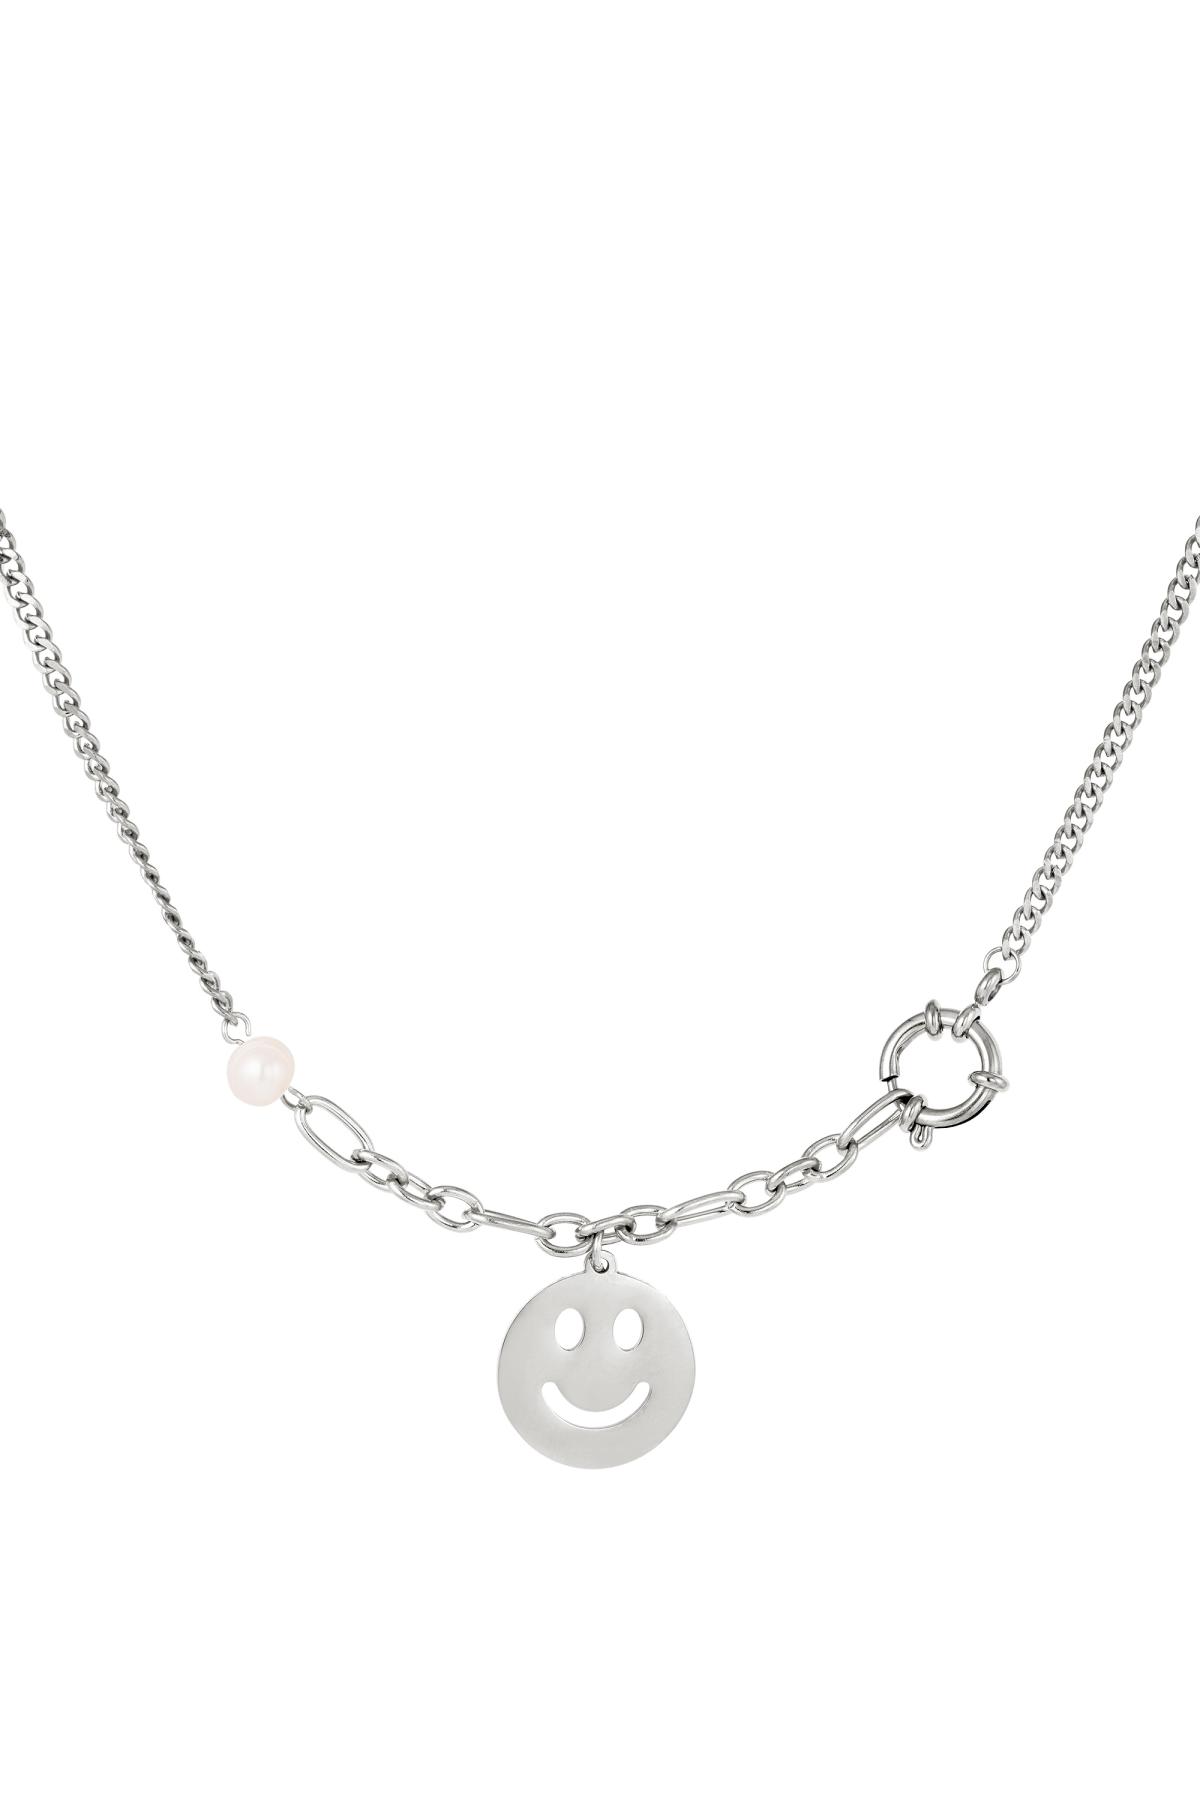 Stainless steel necklace smiley face Silver